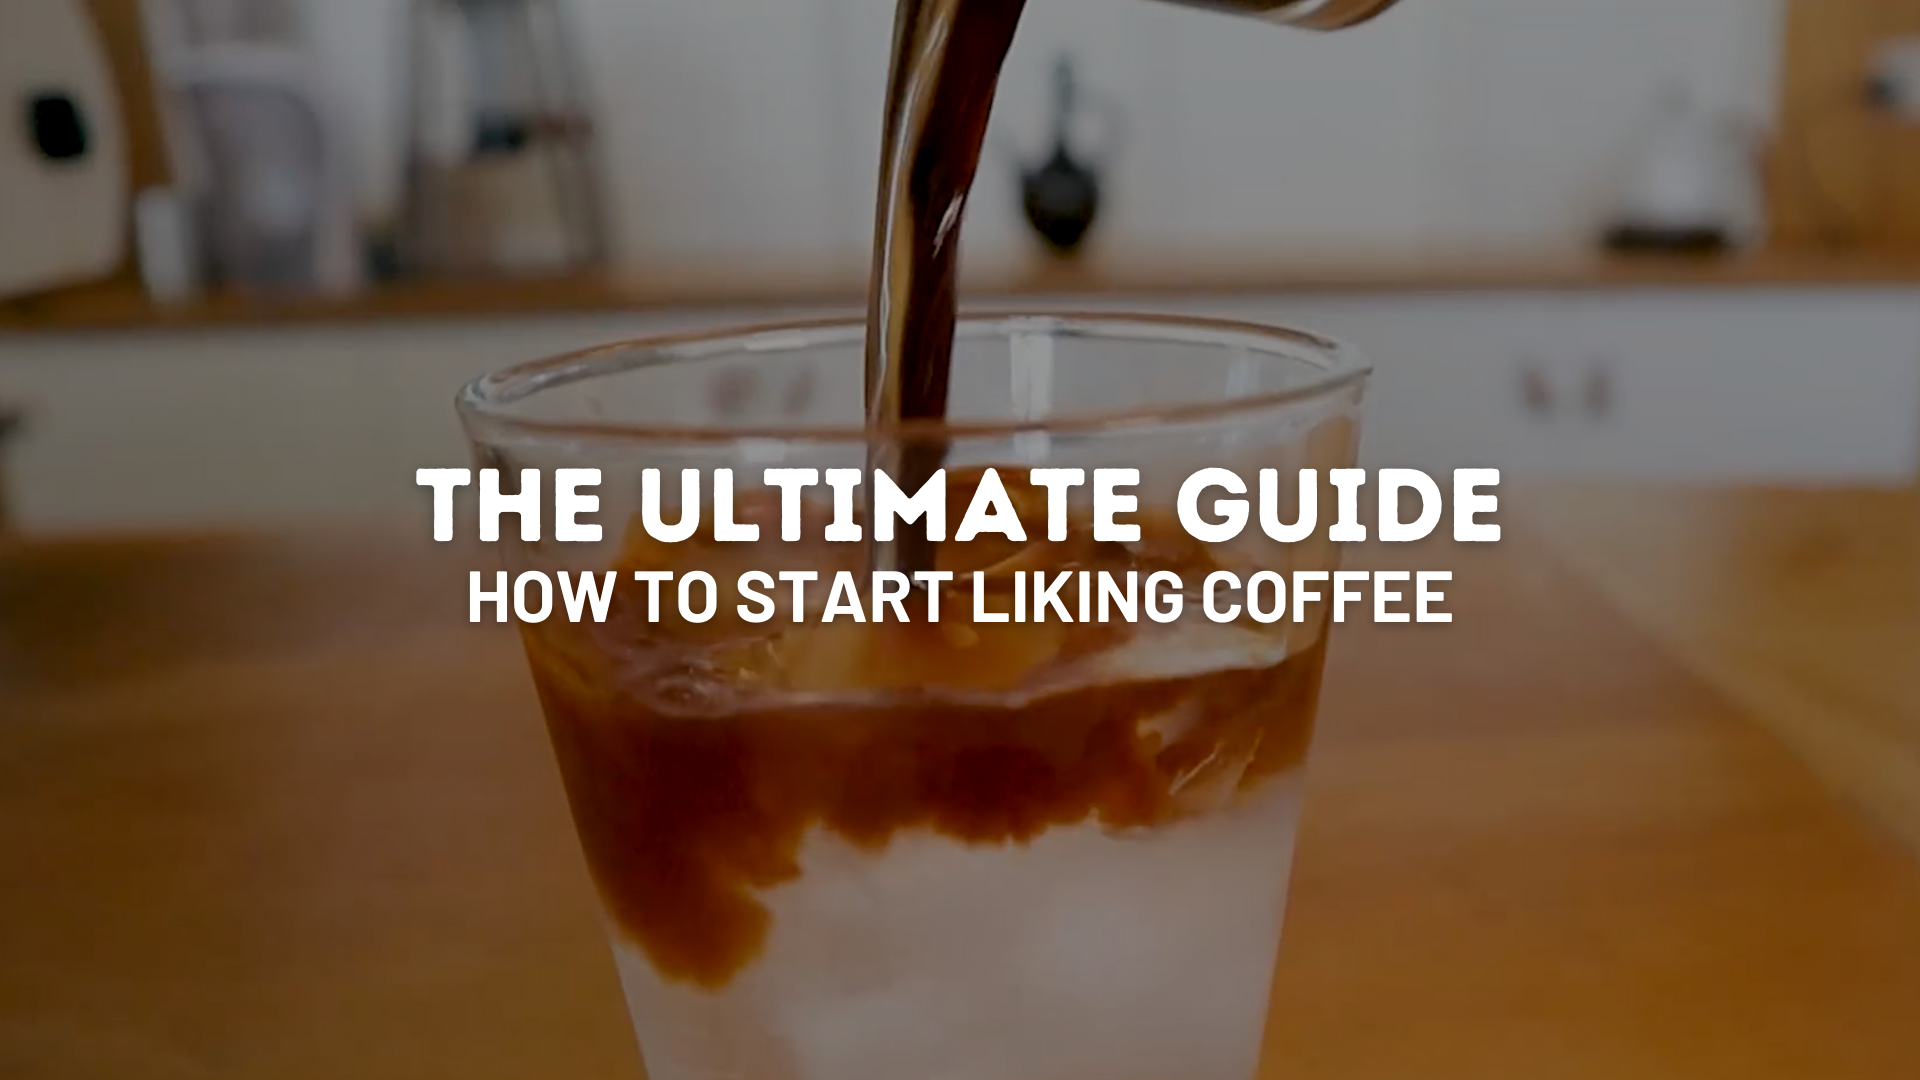 How to start liking coffee? THE ULTIMATE GUIDE